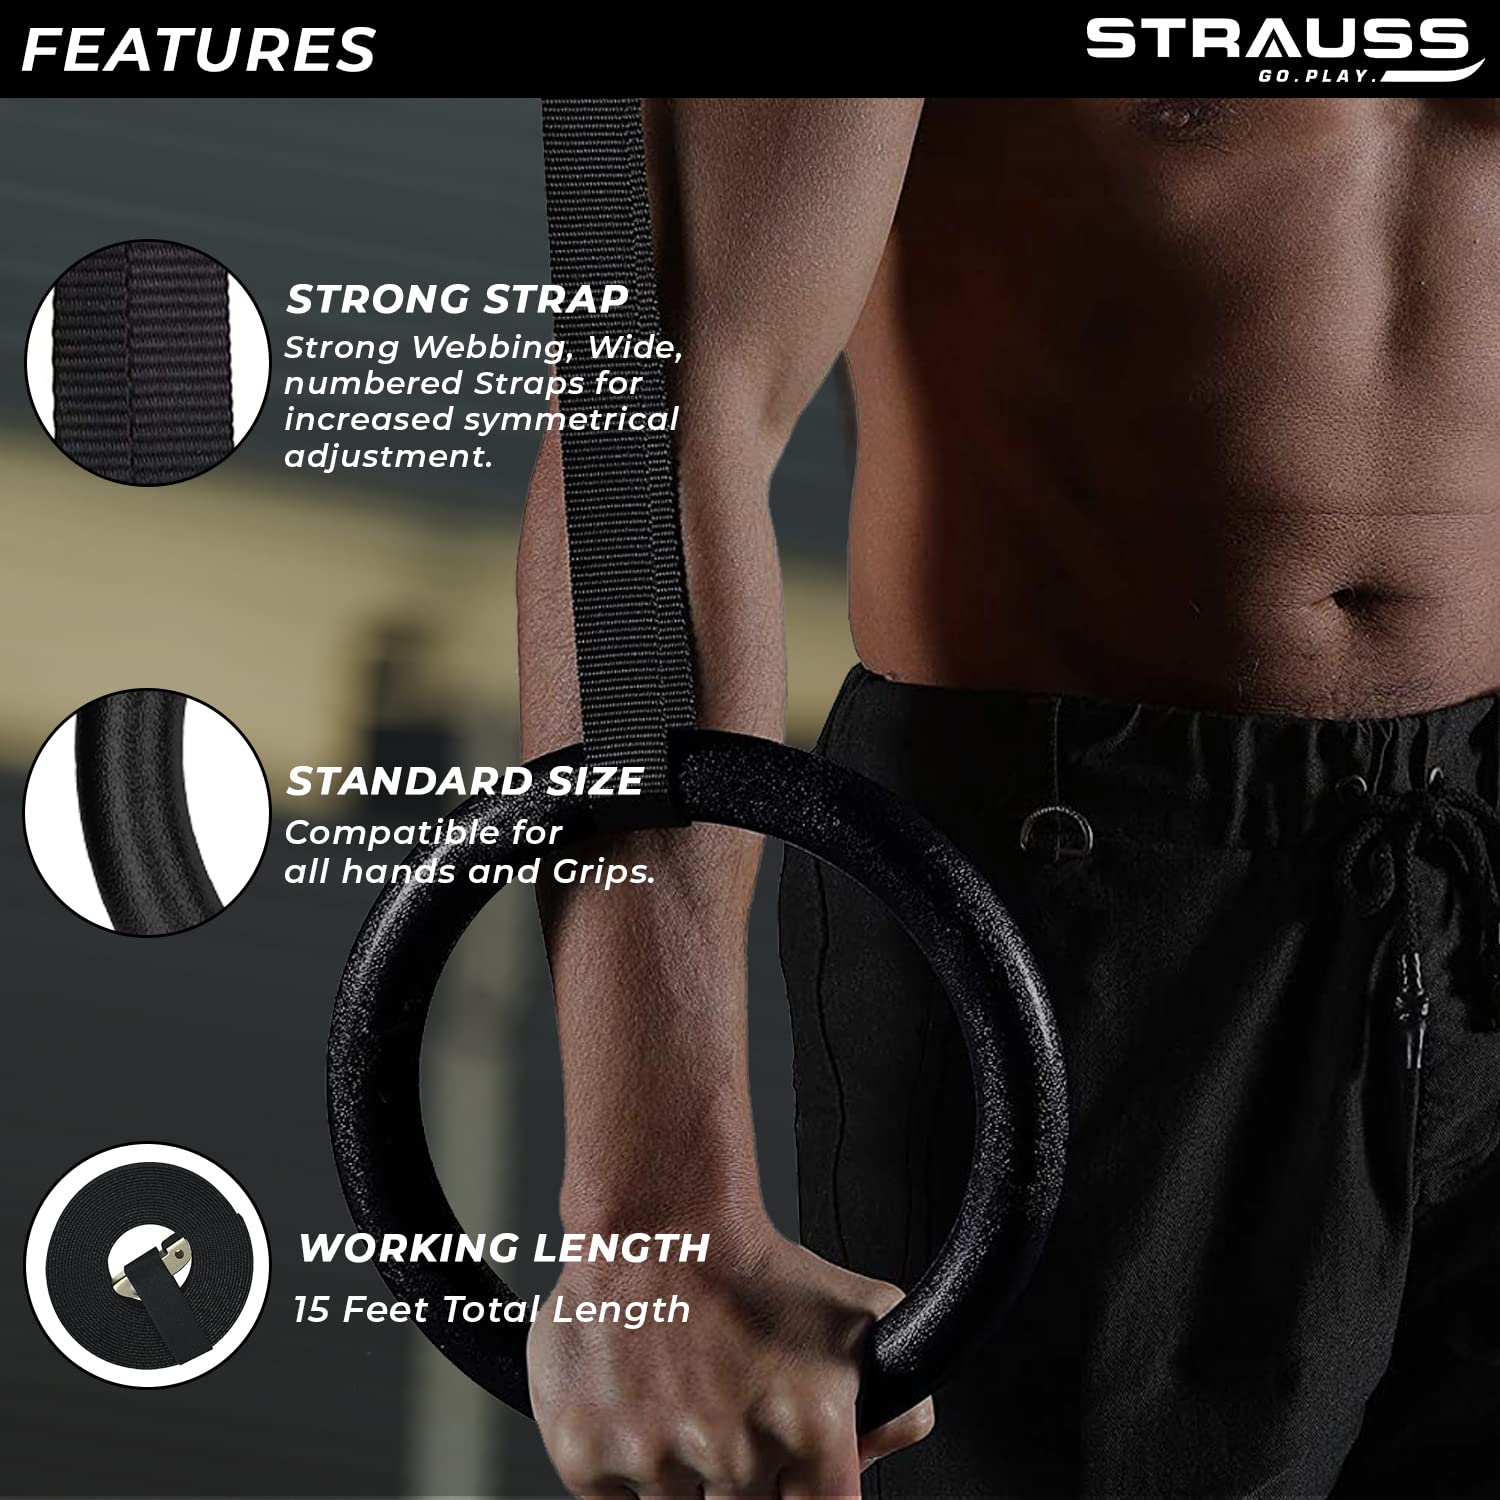 Gymnastic Rings, Fitness Rings w/ Adjustable Buckles Straps - PHAT™